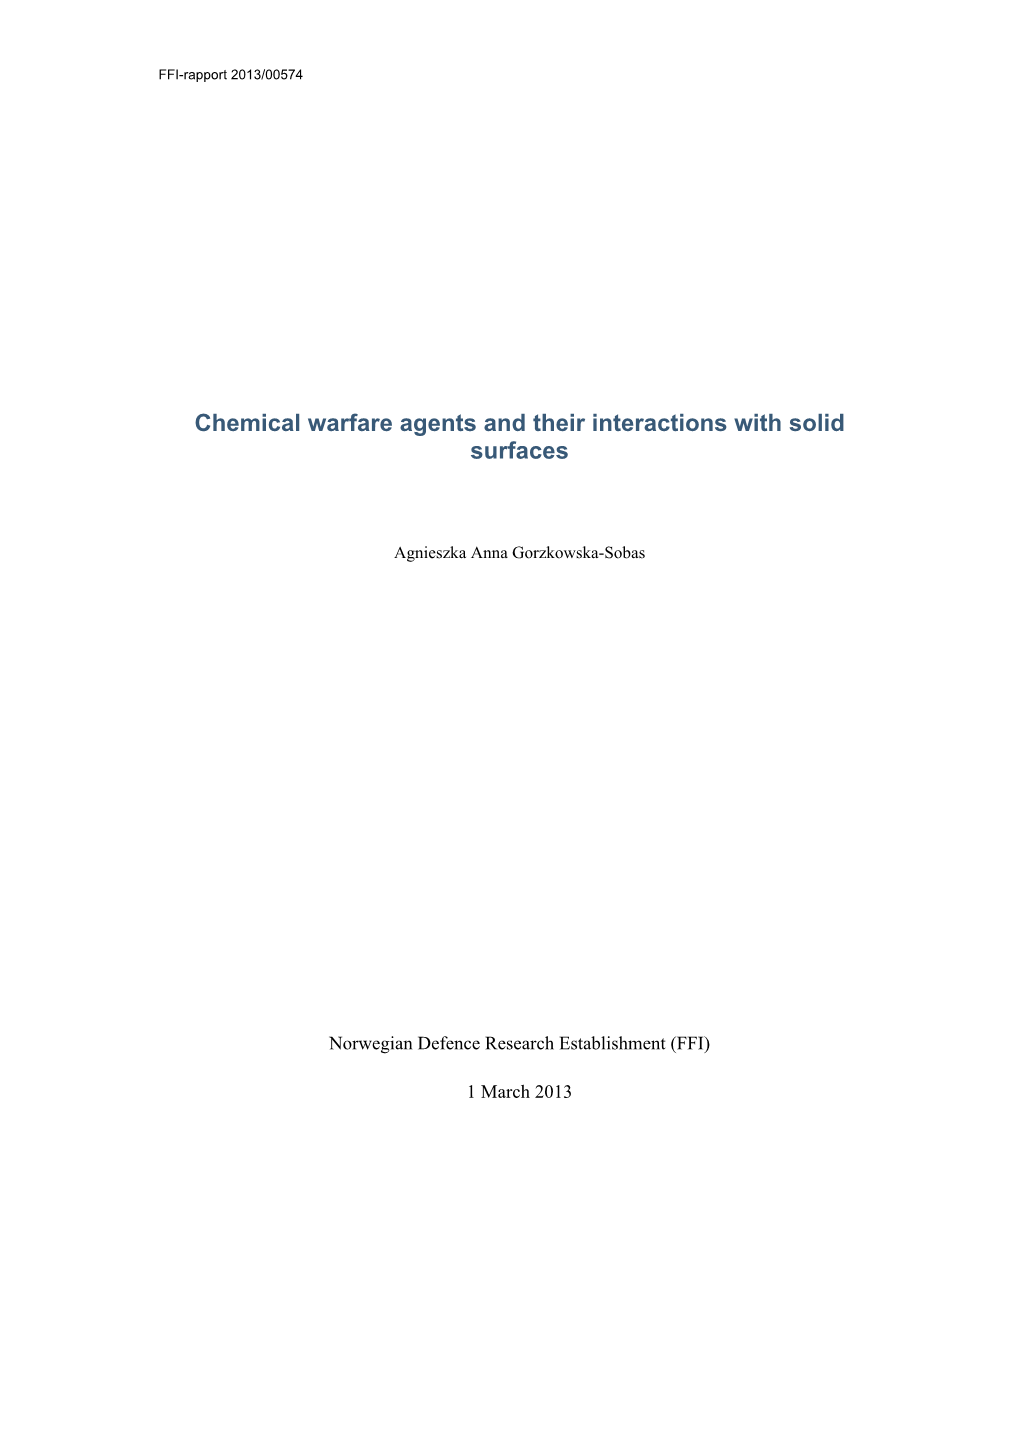 Chemical Warfare Agents and Their Interactions with Solid Surfaces